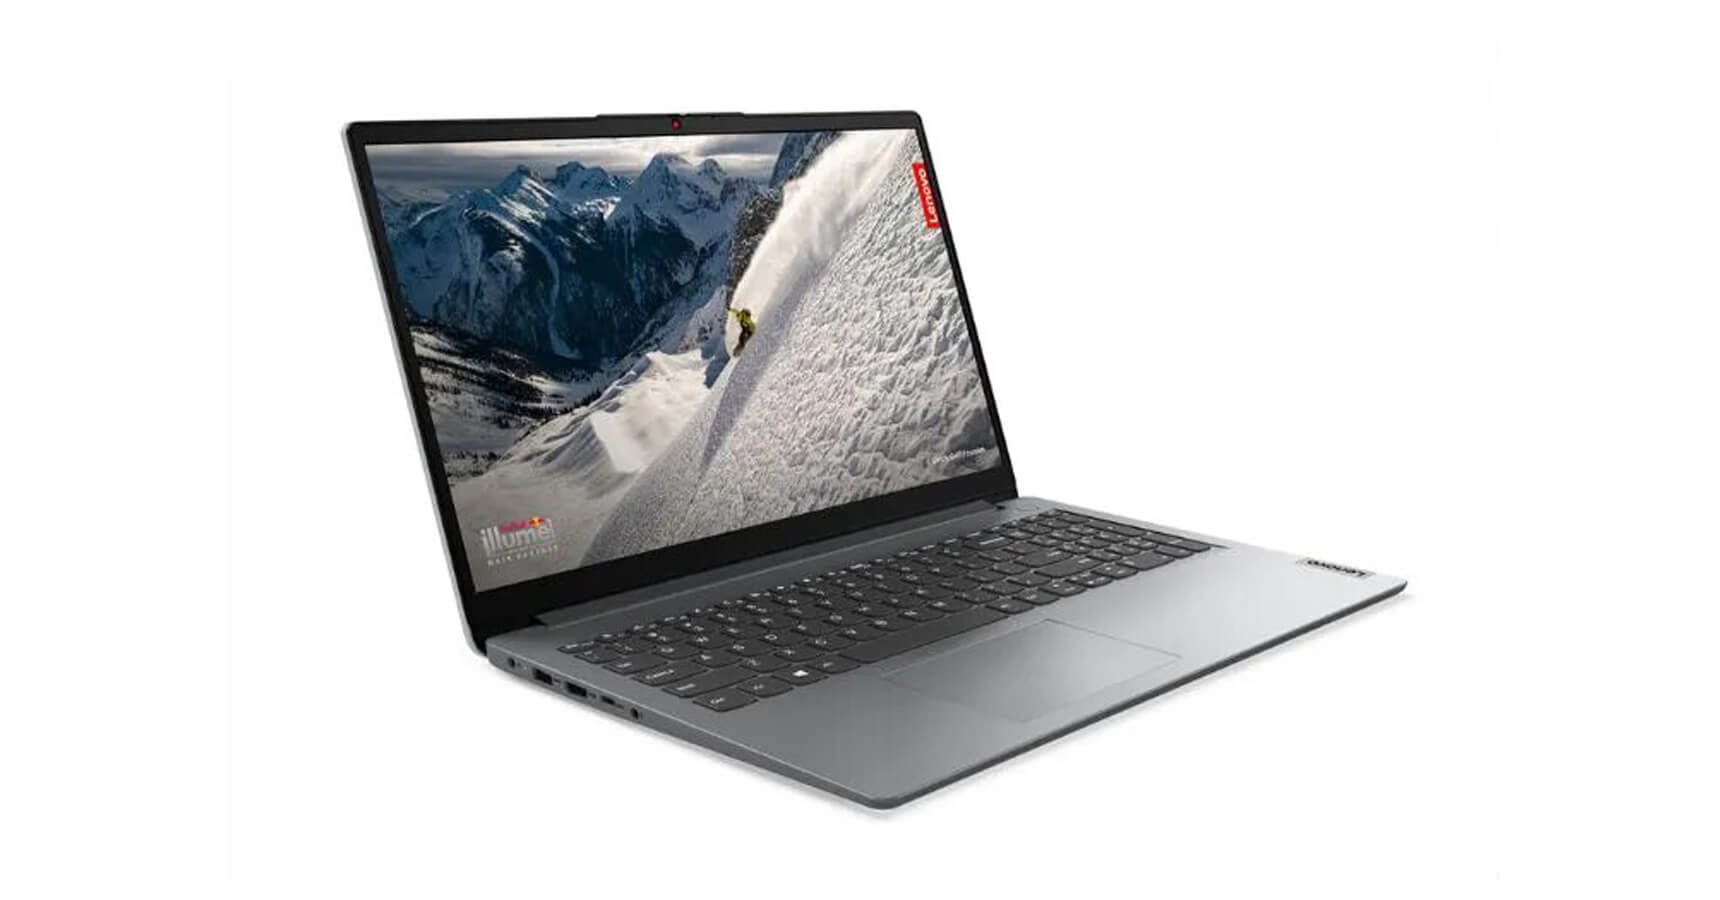 Lenovo IdeaPad 1 Laptop Launched in India